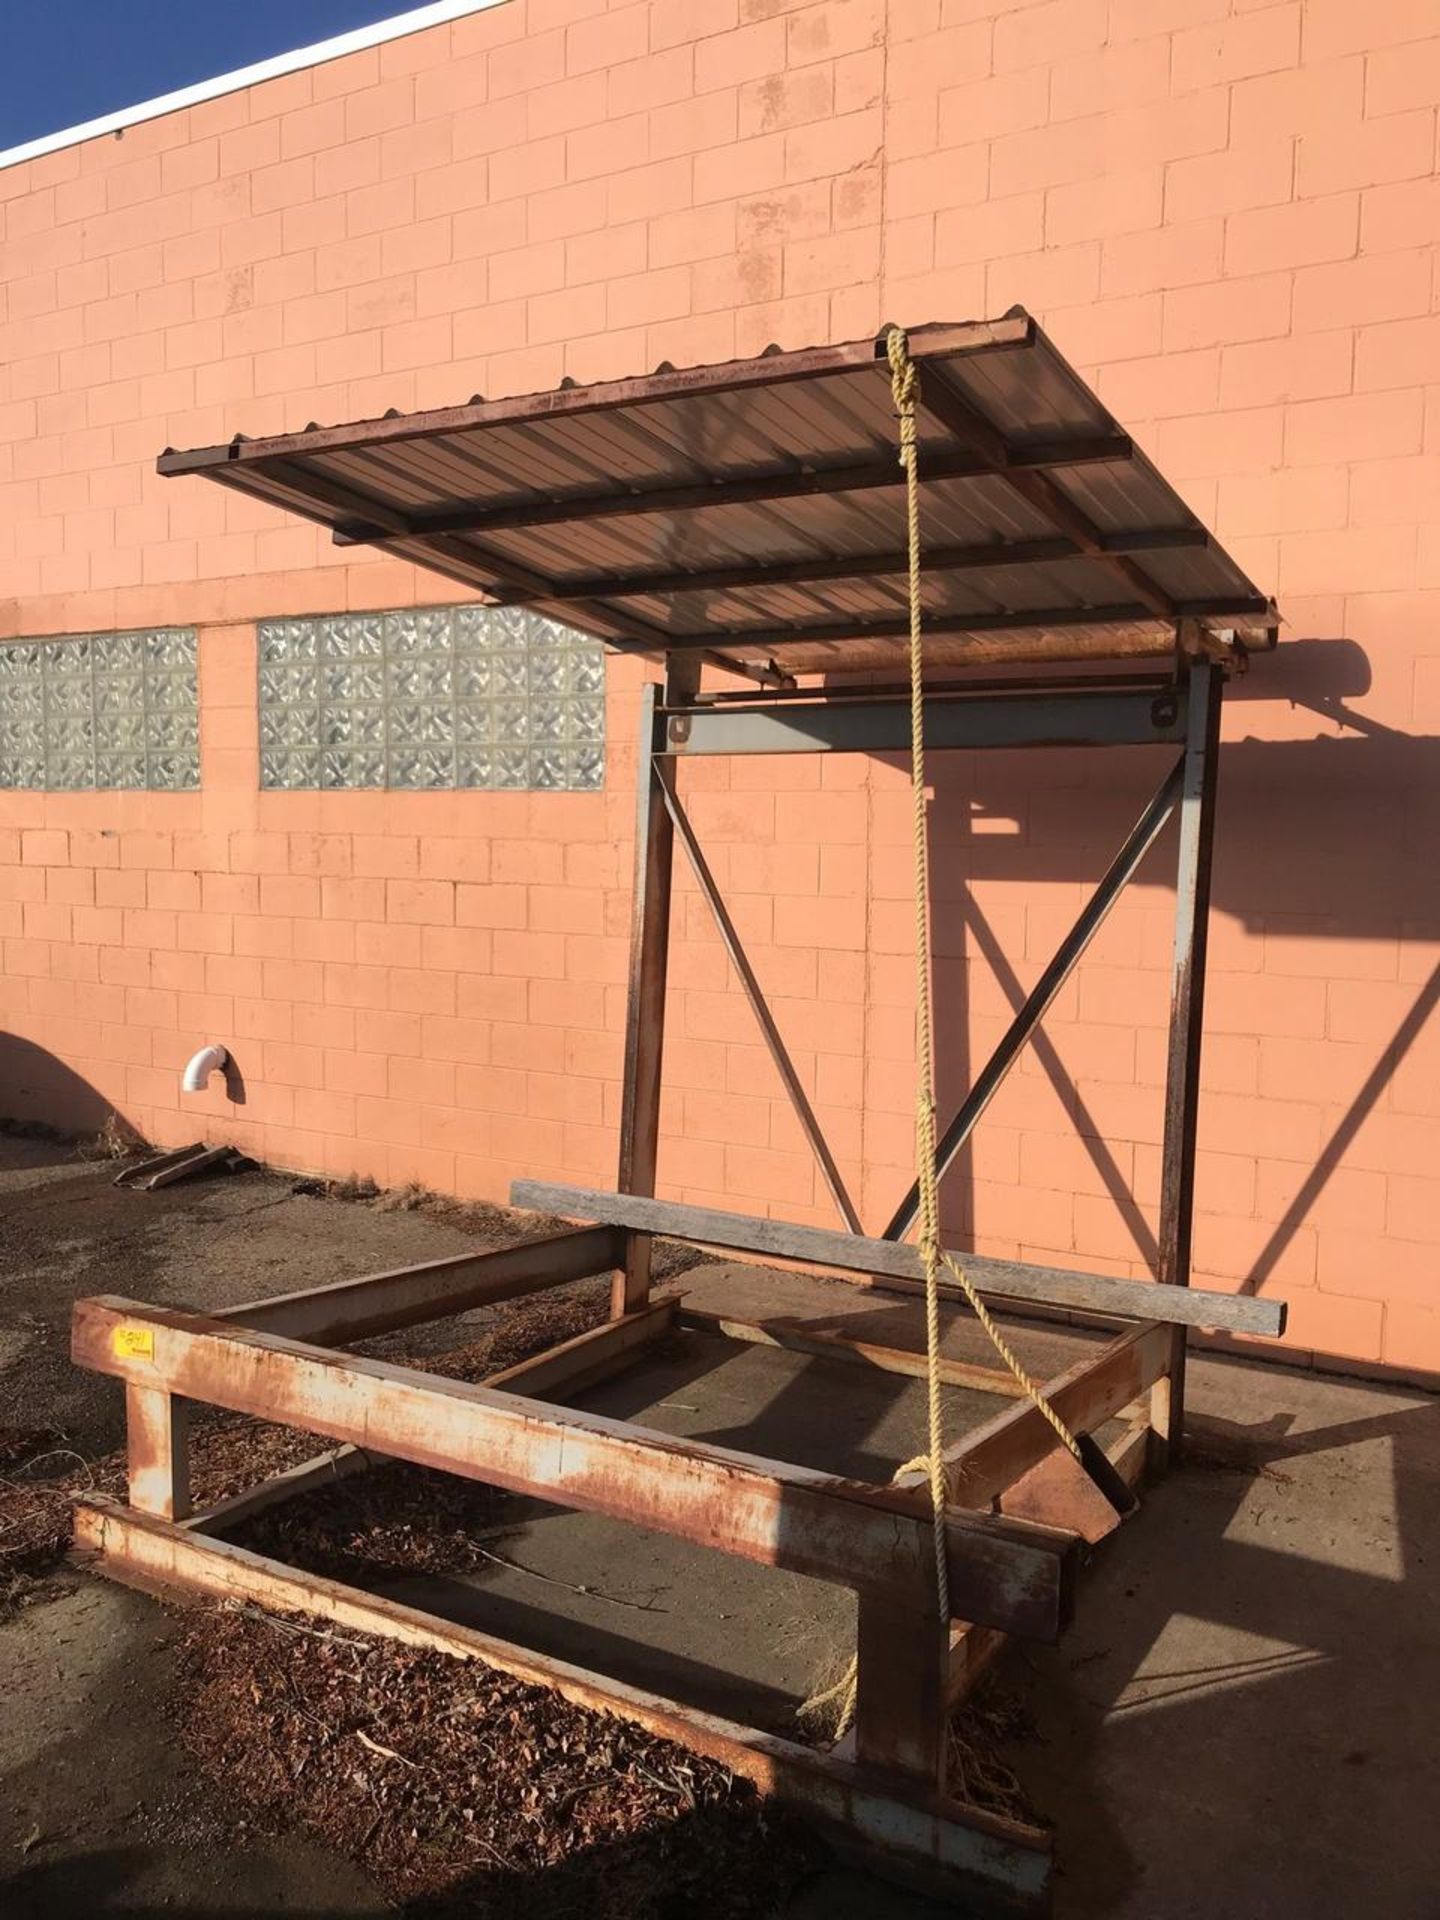 Steel Fabricated Structure - Image 2 of 2